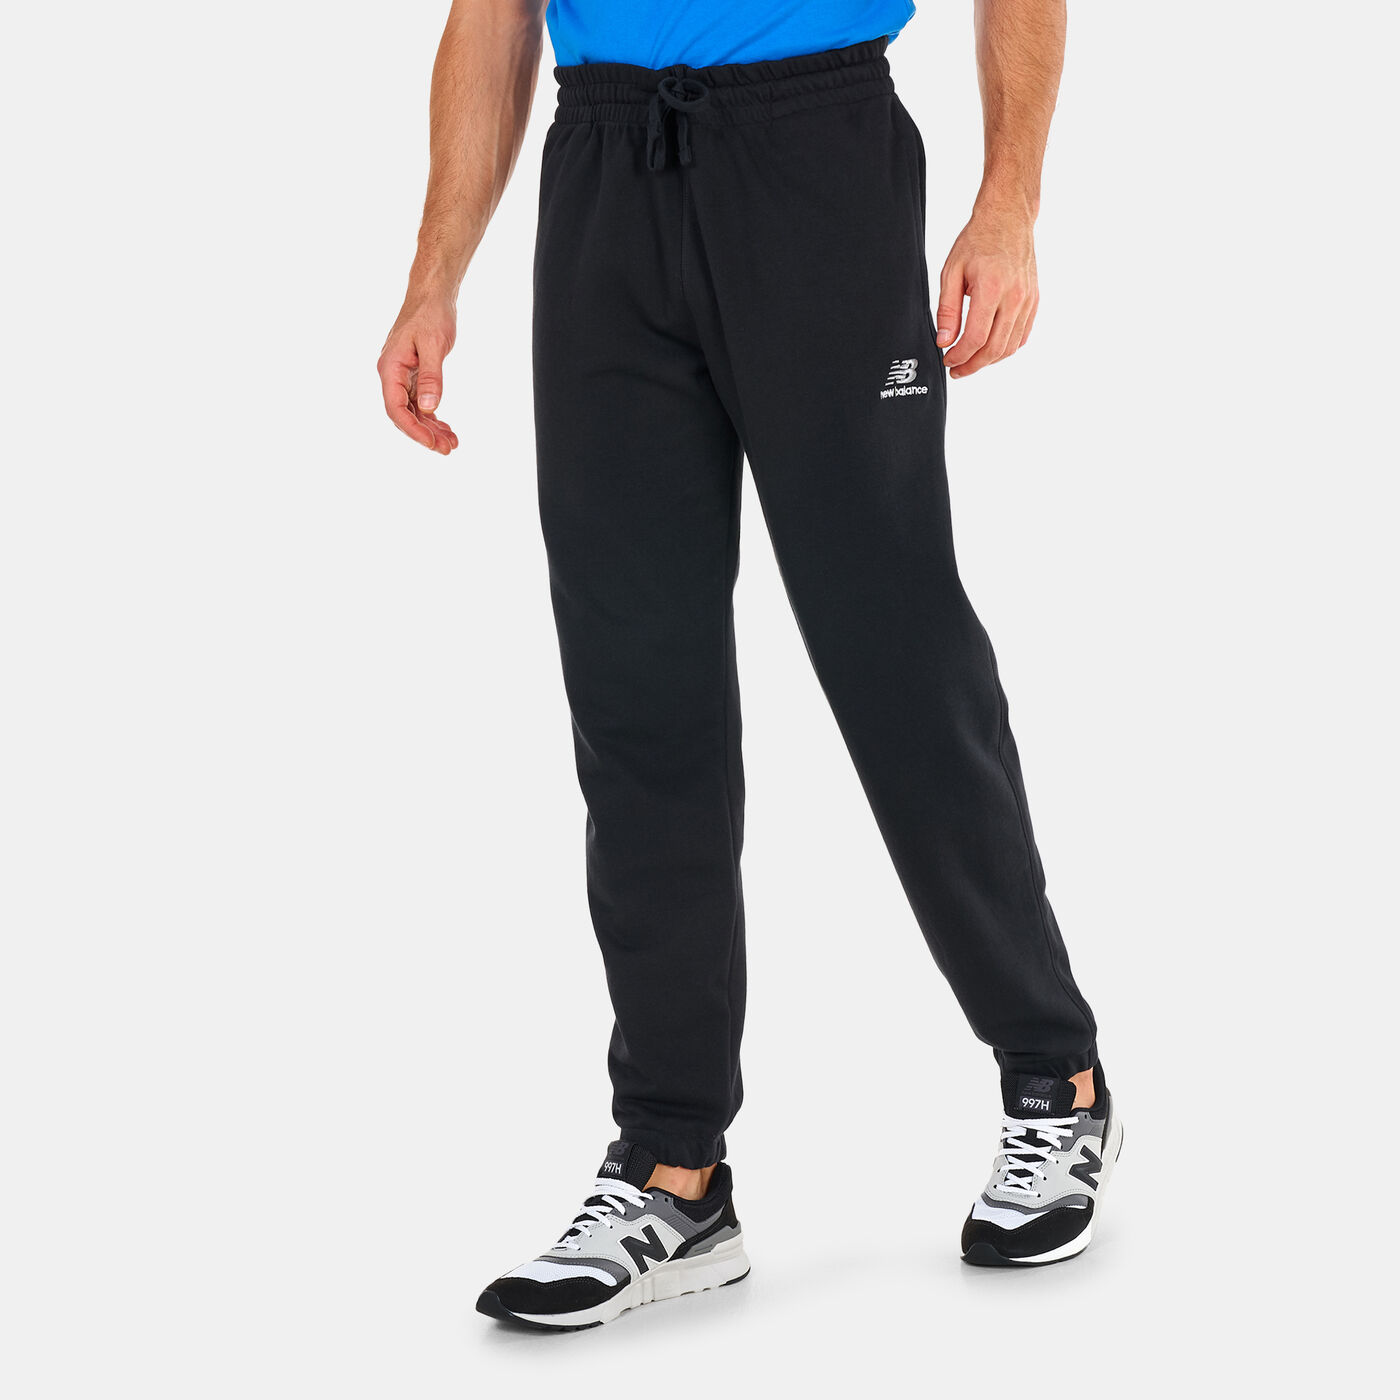 Uni-ssentials French Terry Sweatpants